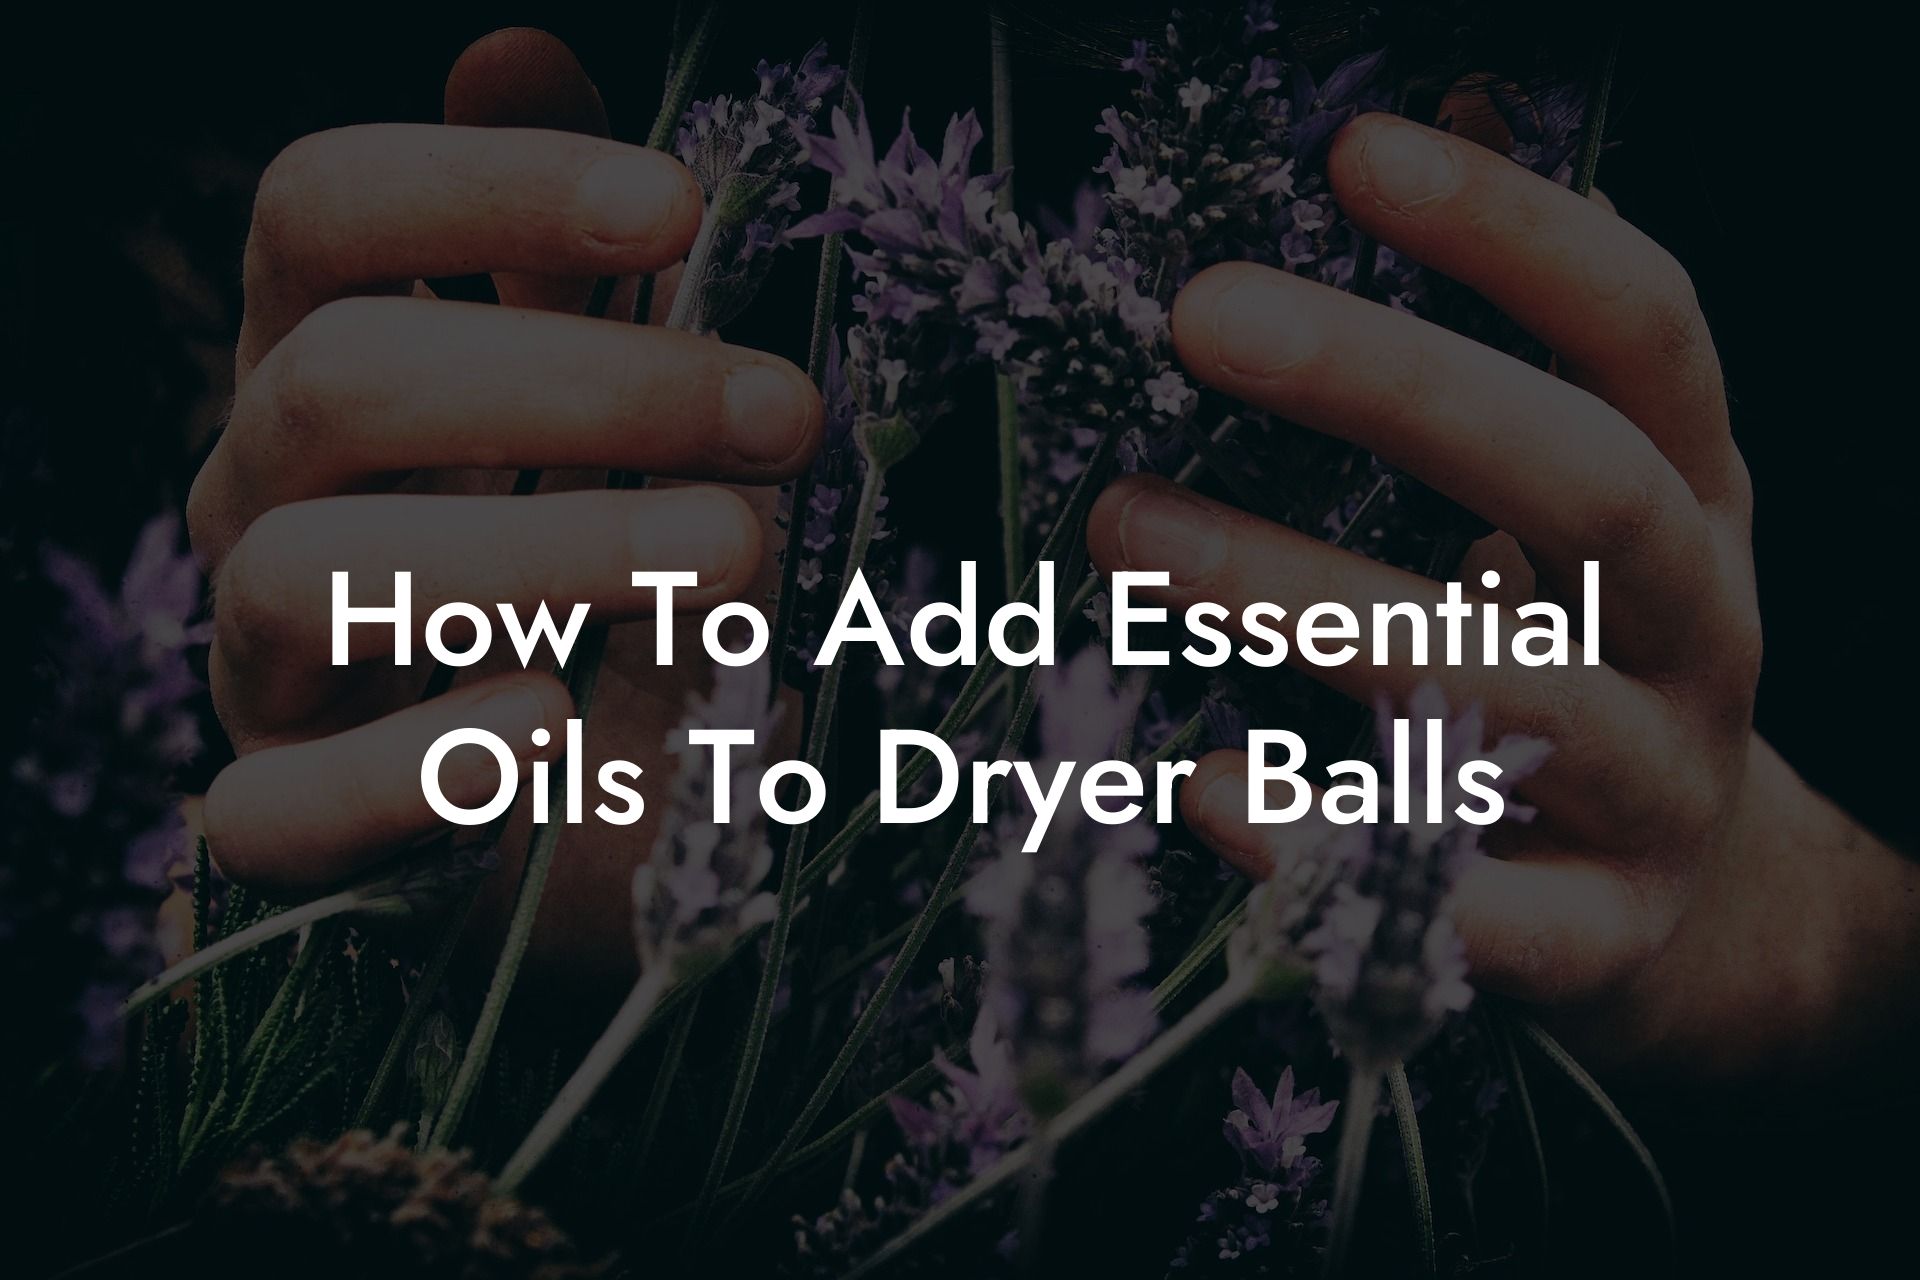 How To Add Essential Oils To Dryer Balls